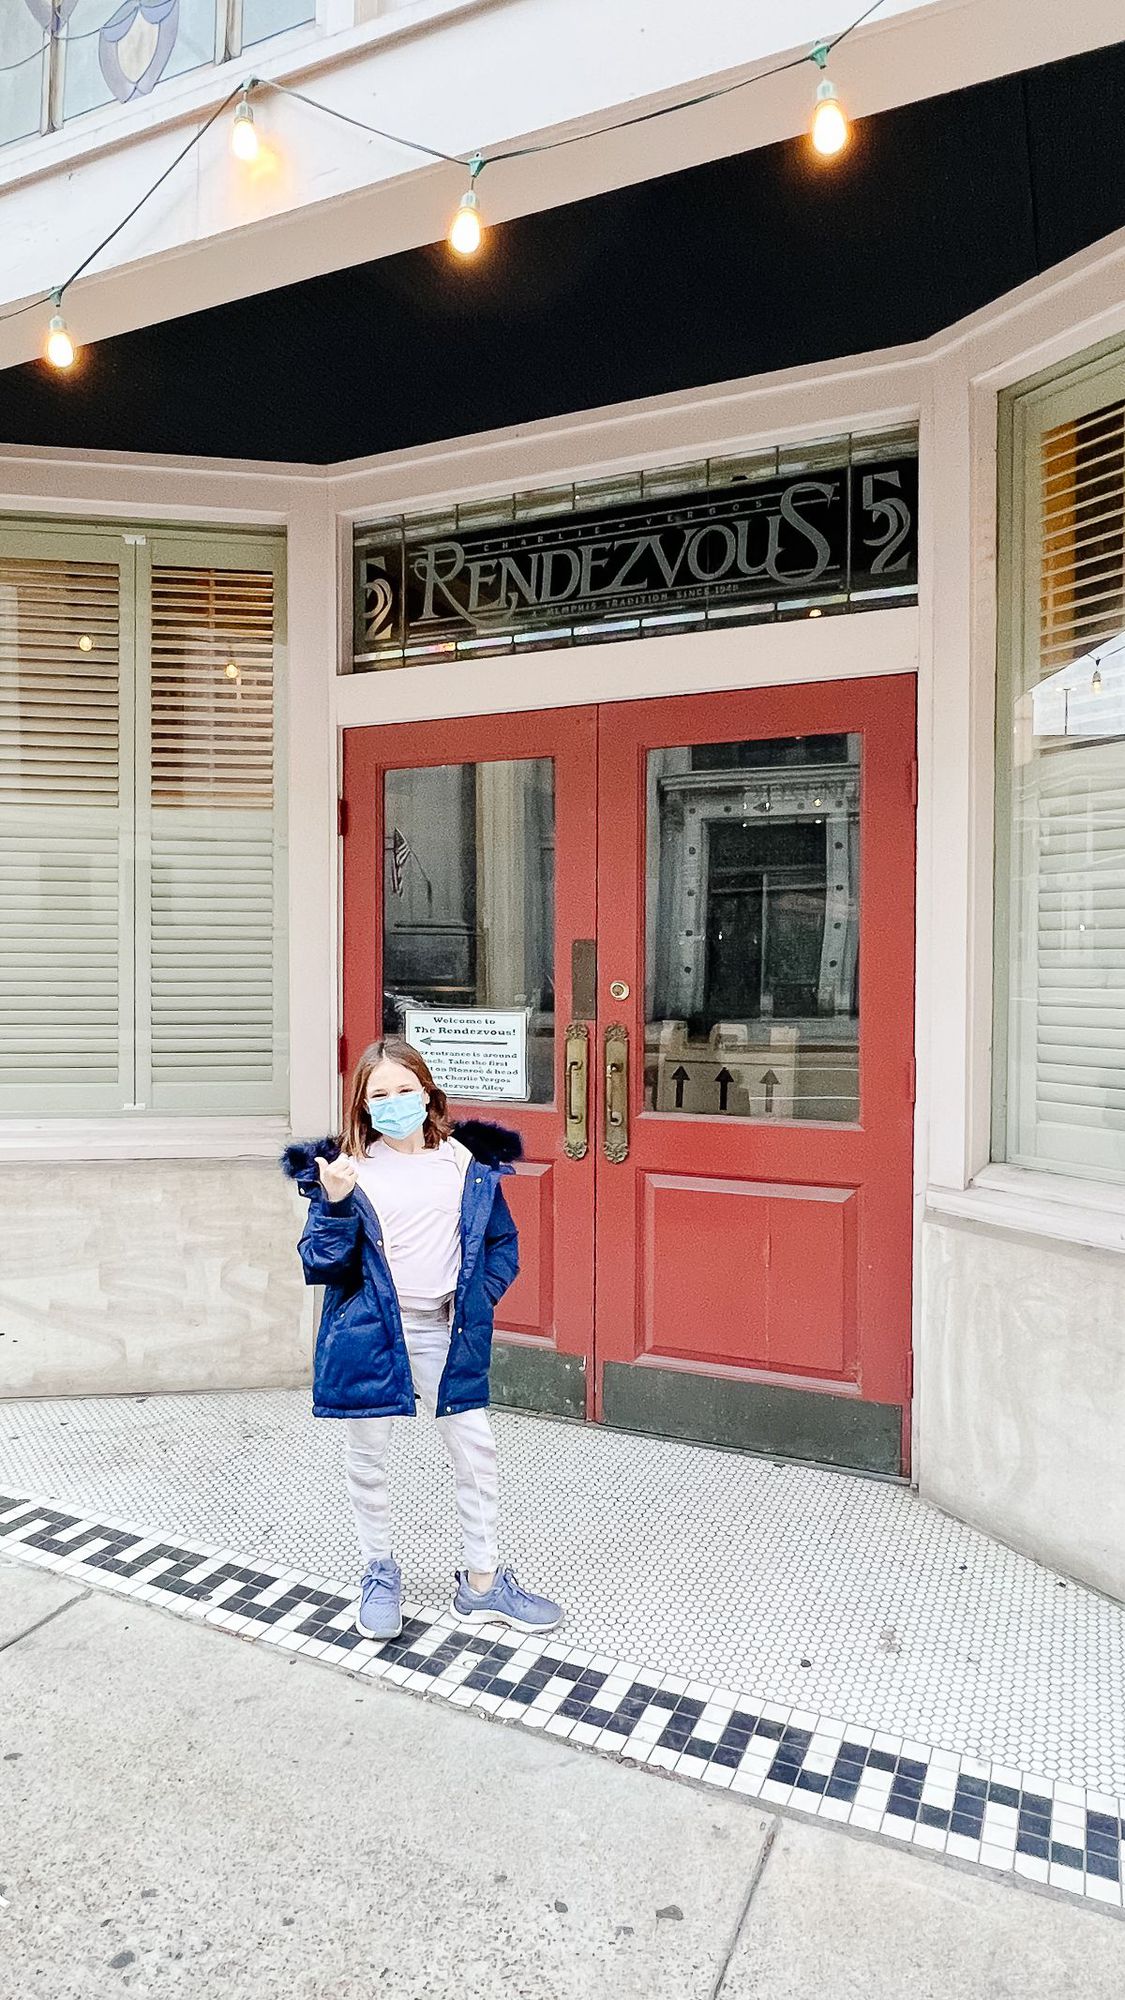 A girl in front of the doors of a famous Memphis Tennessee historic building